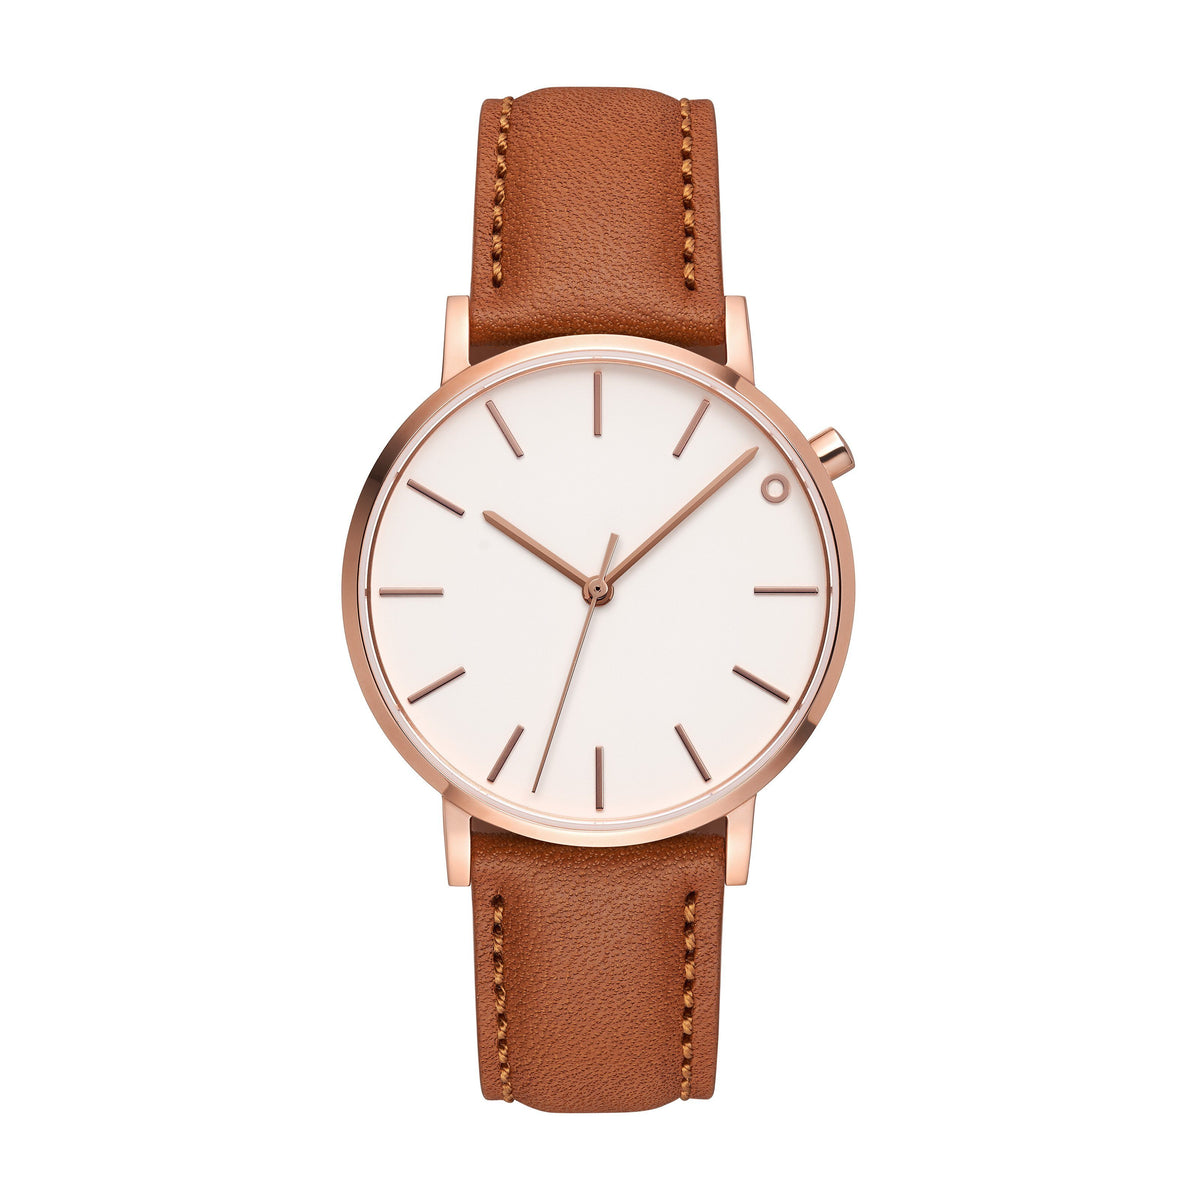 The White and Rose Gold Watch - Leather